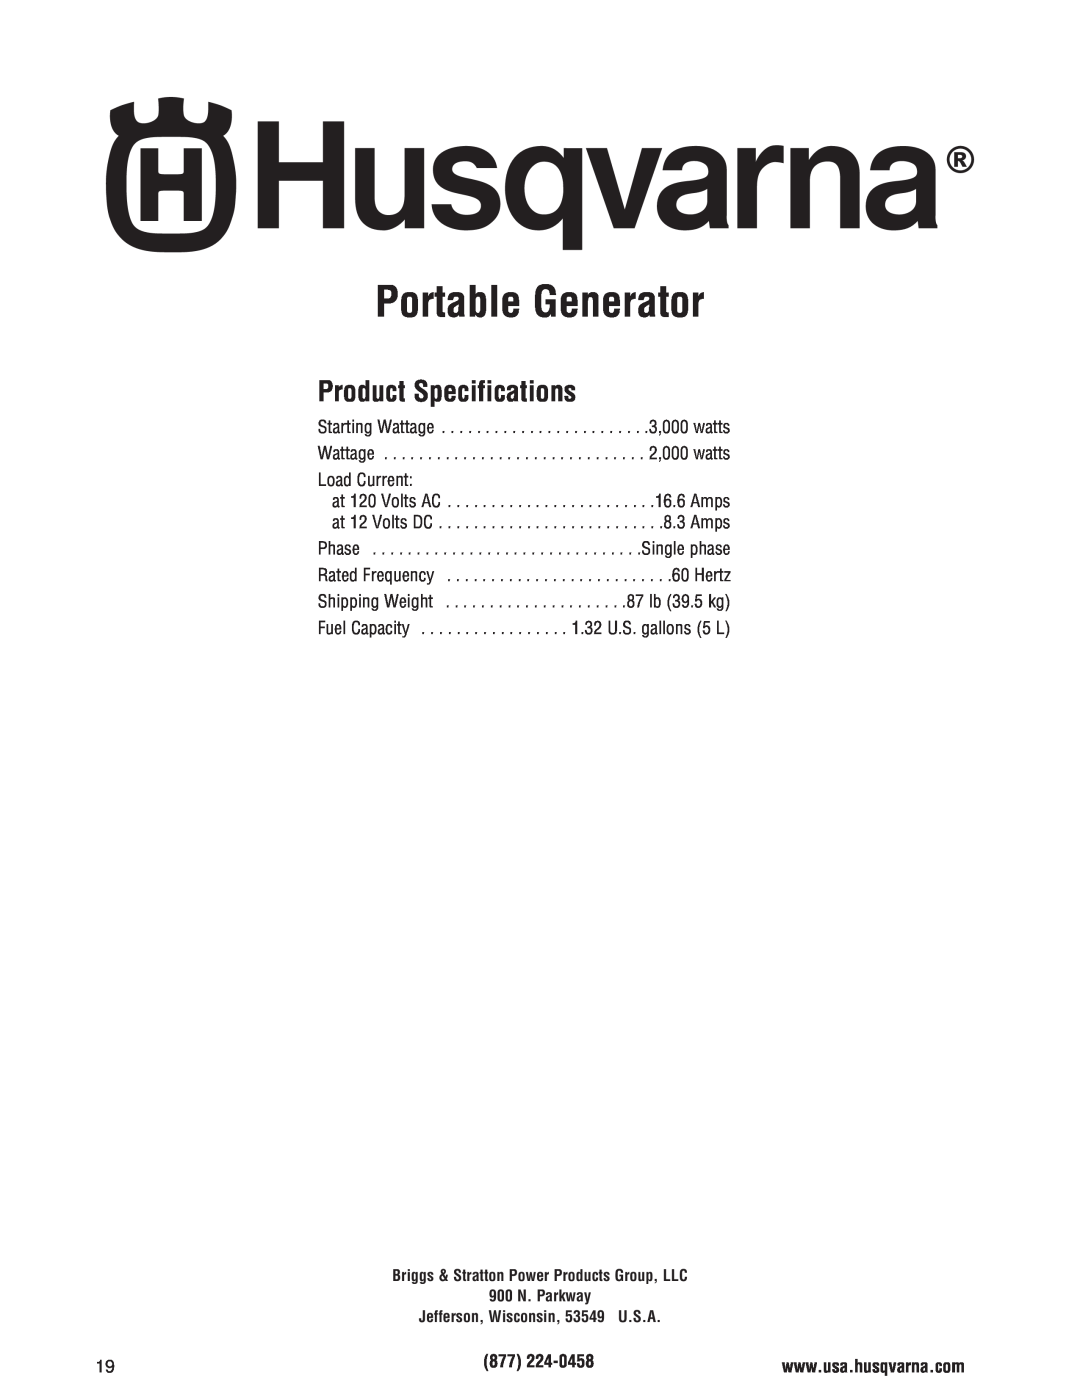 Husqvarna 420 GN manual Portable Generator, Product Specifications 